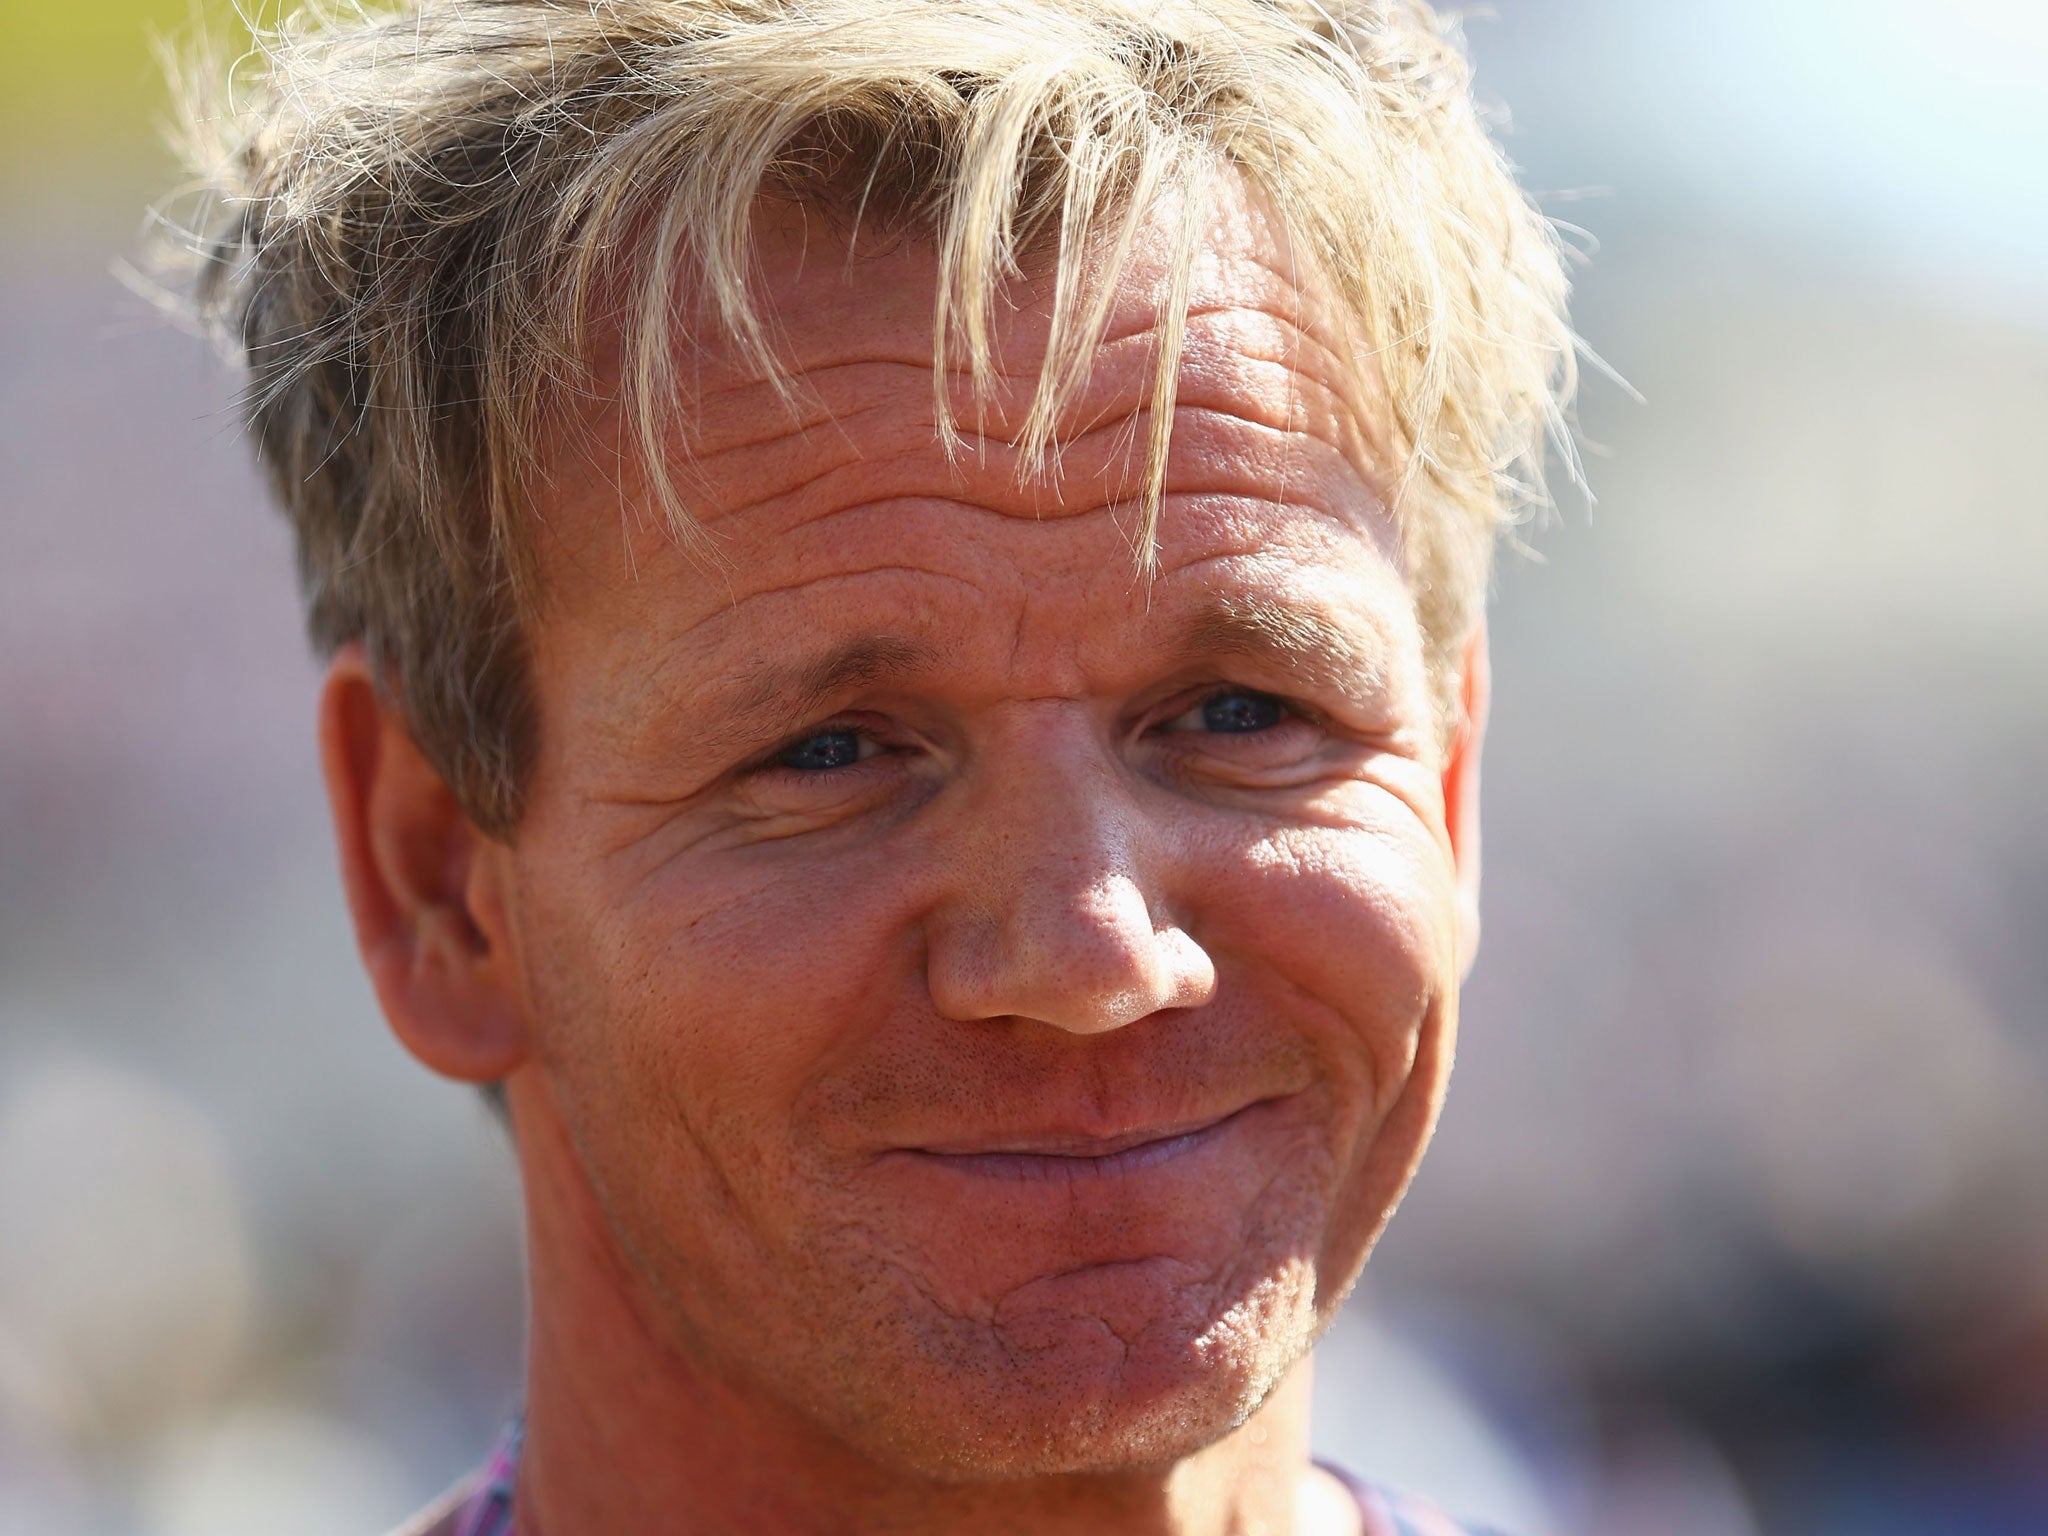 Gordon Ramsay has admitted on TV that he uses a hidden camera to spy on his daughter’s bedroom